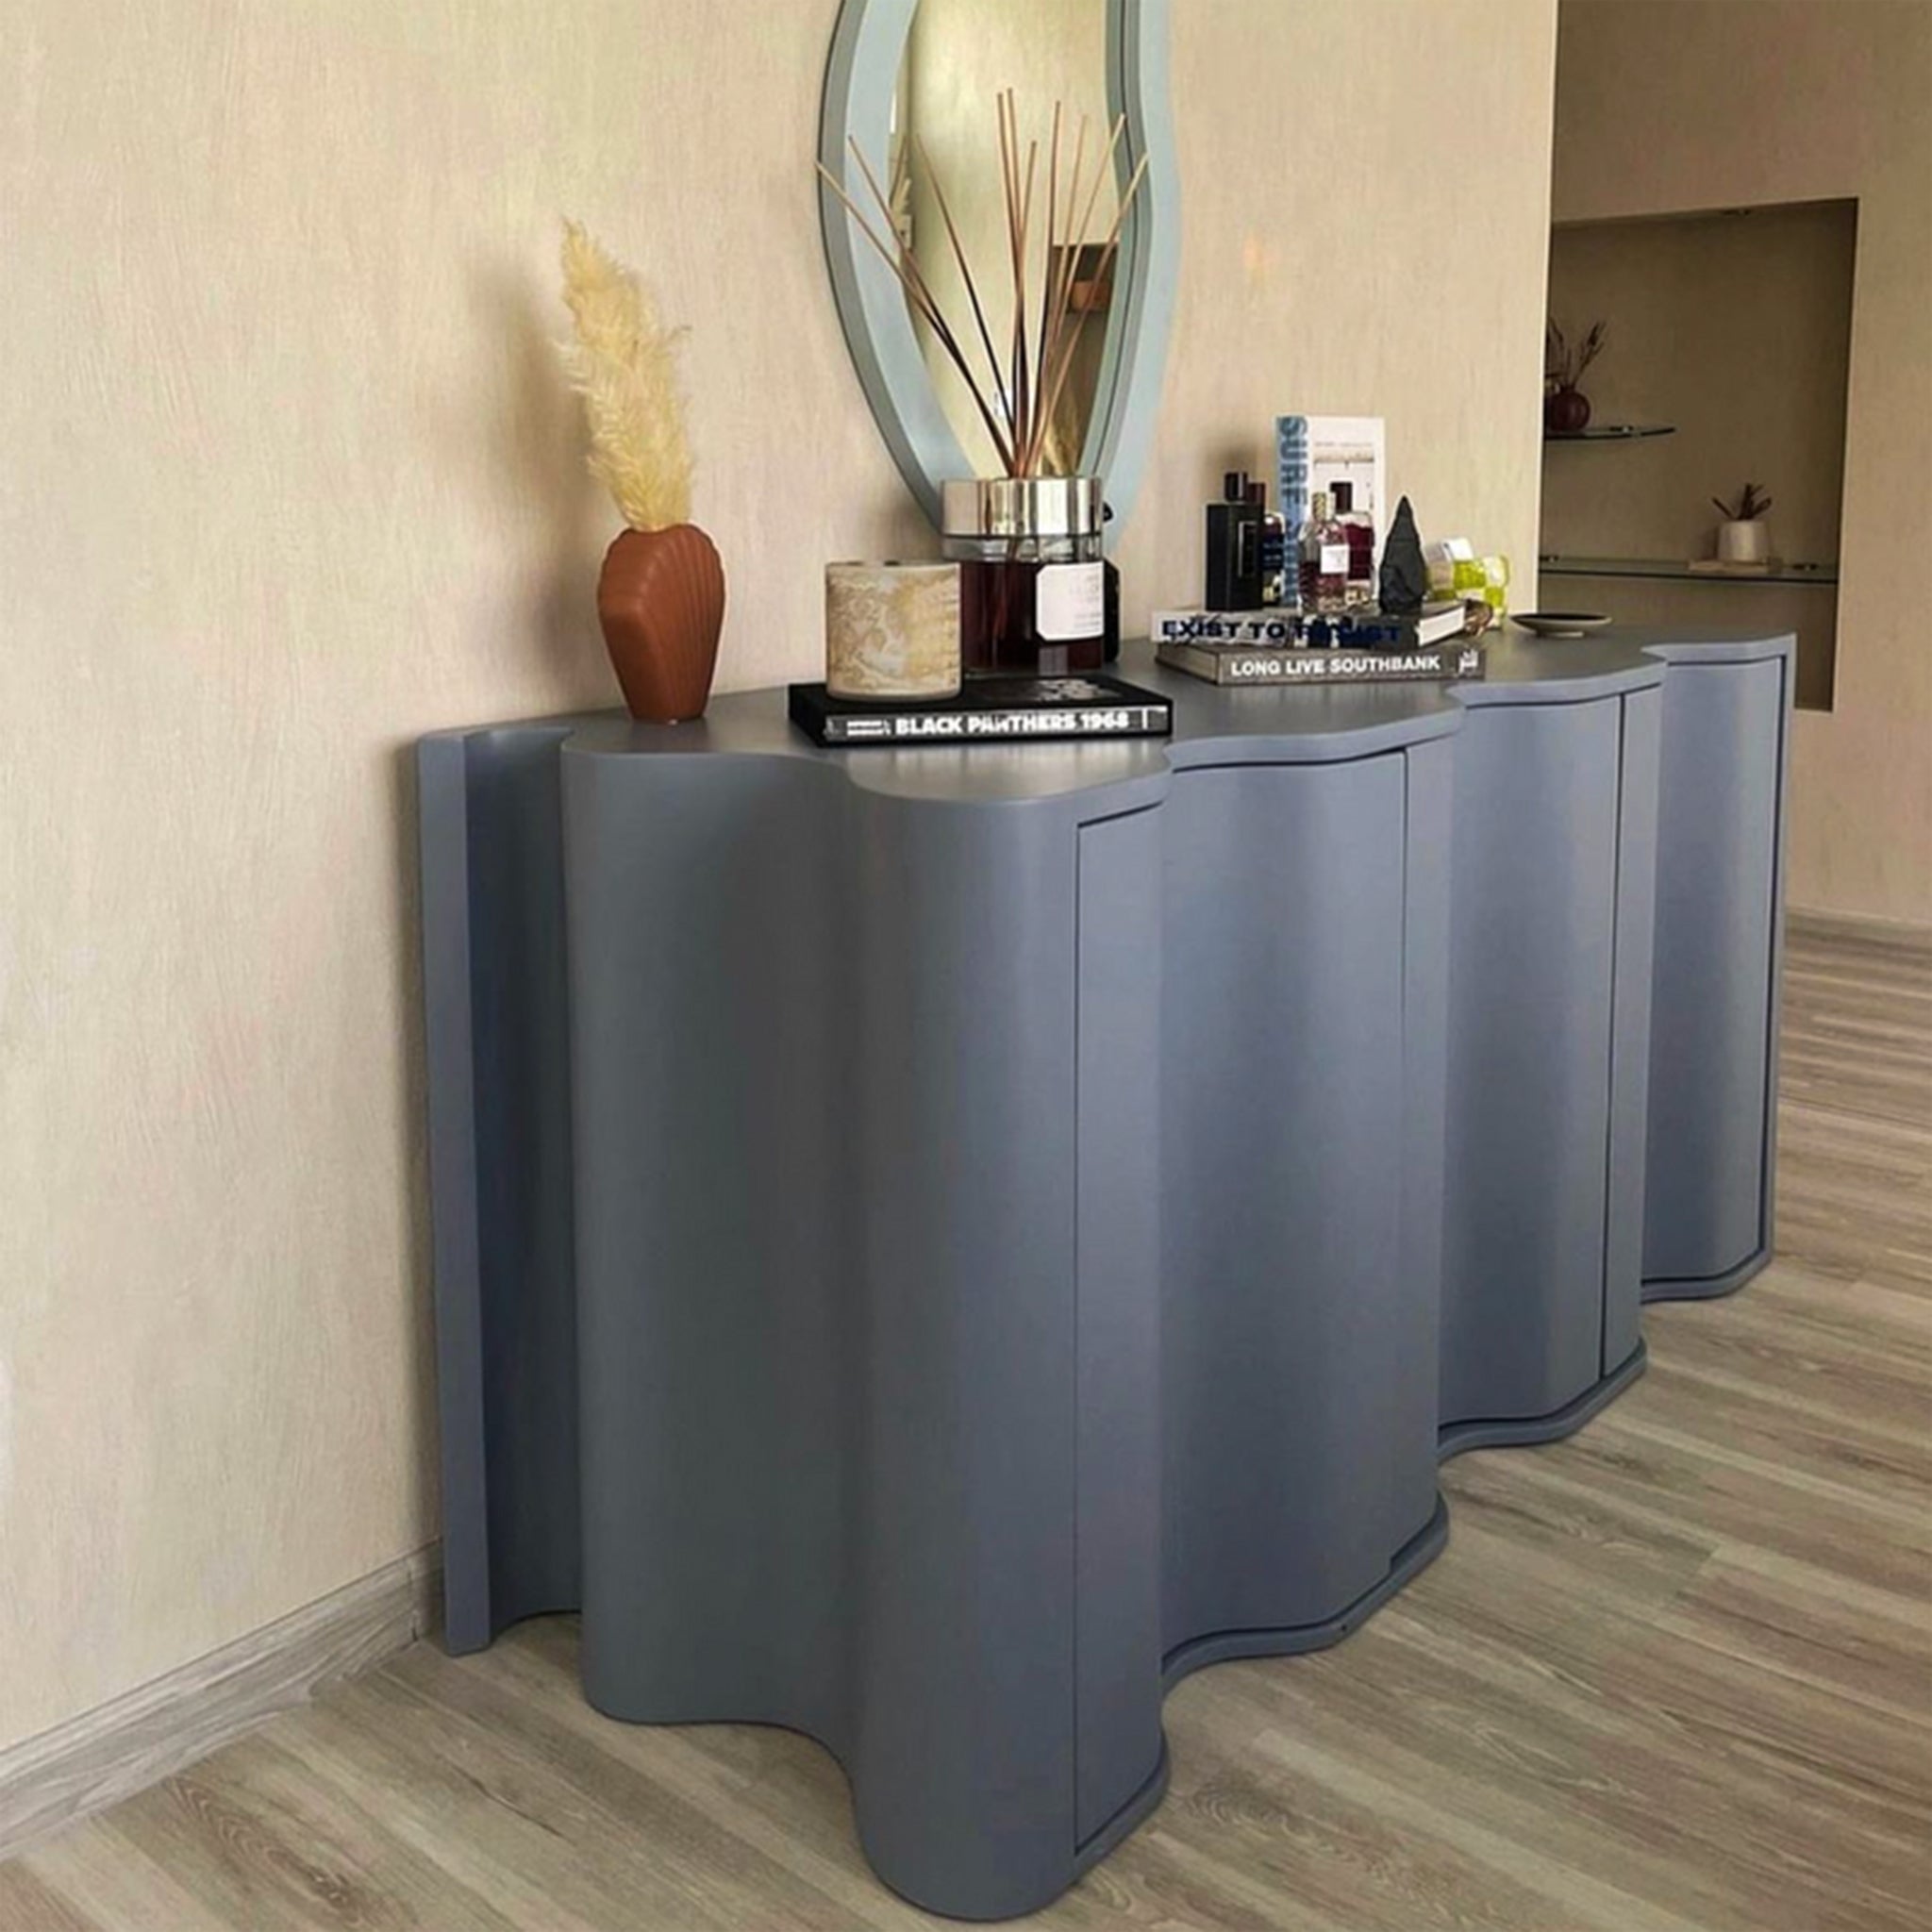 A contemporary sideboard with a wavy front design in a muted gray color, topped with various decorative items including books, a reed diffuser, and a vase with dried pampas grass. The sideboard is set against a beige wall with light wooden flooring, creating a modern and stylish interior.